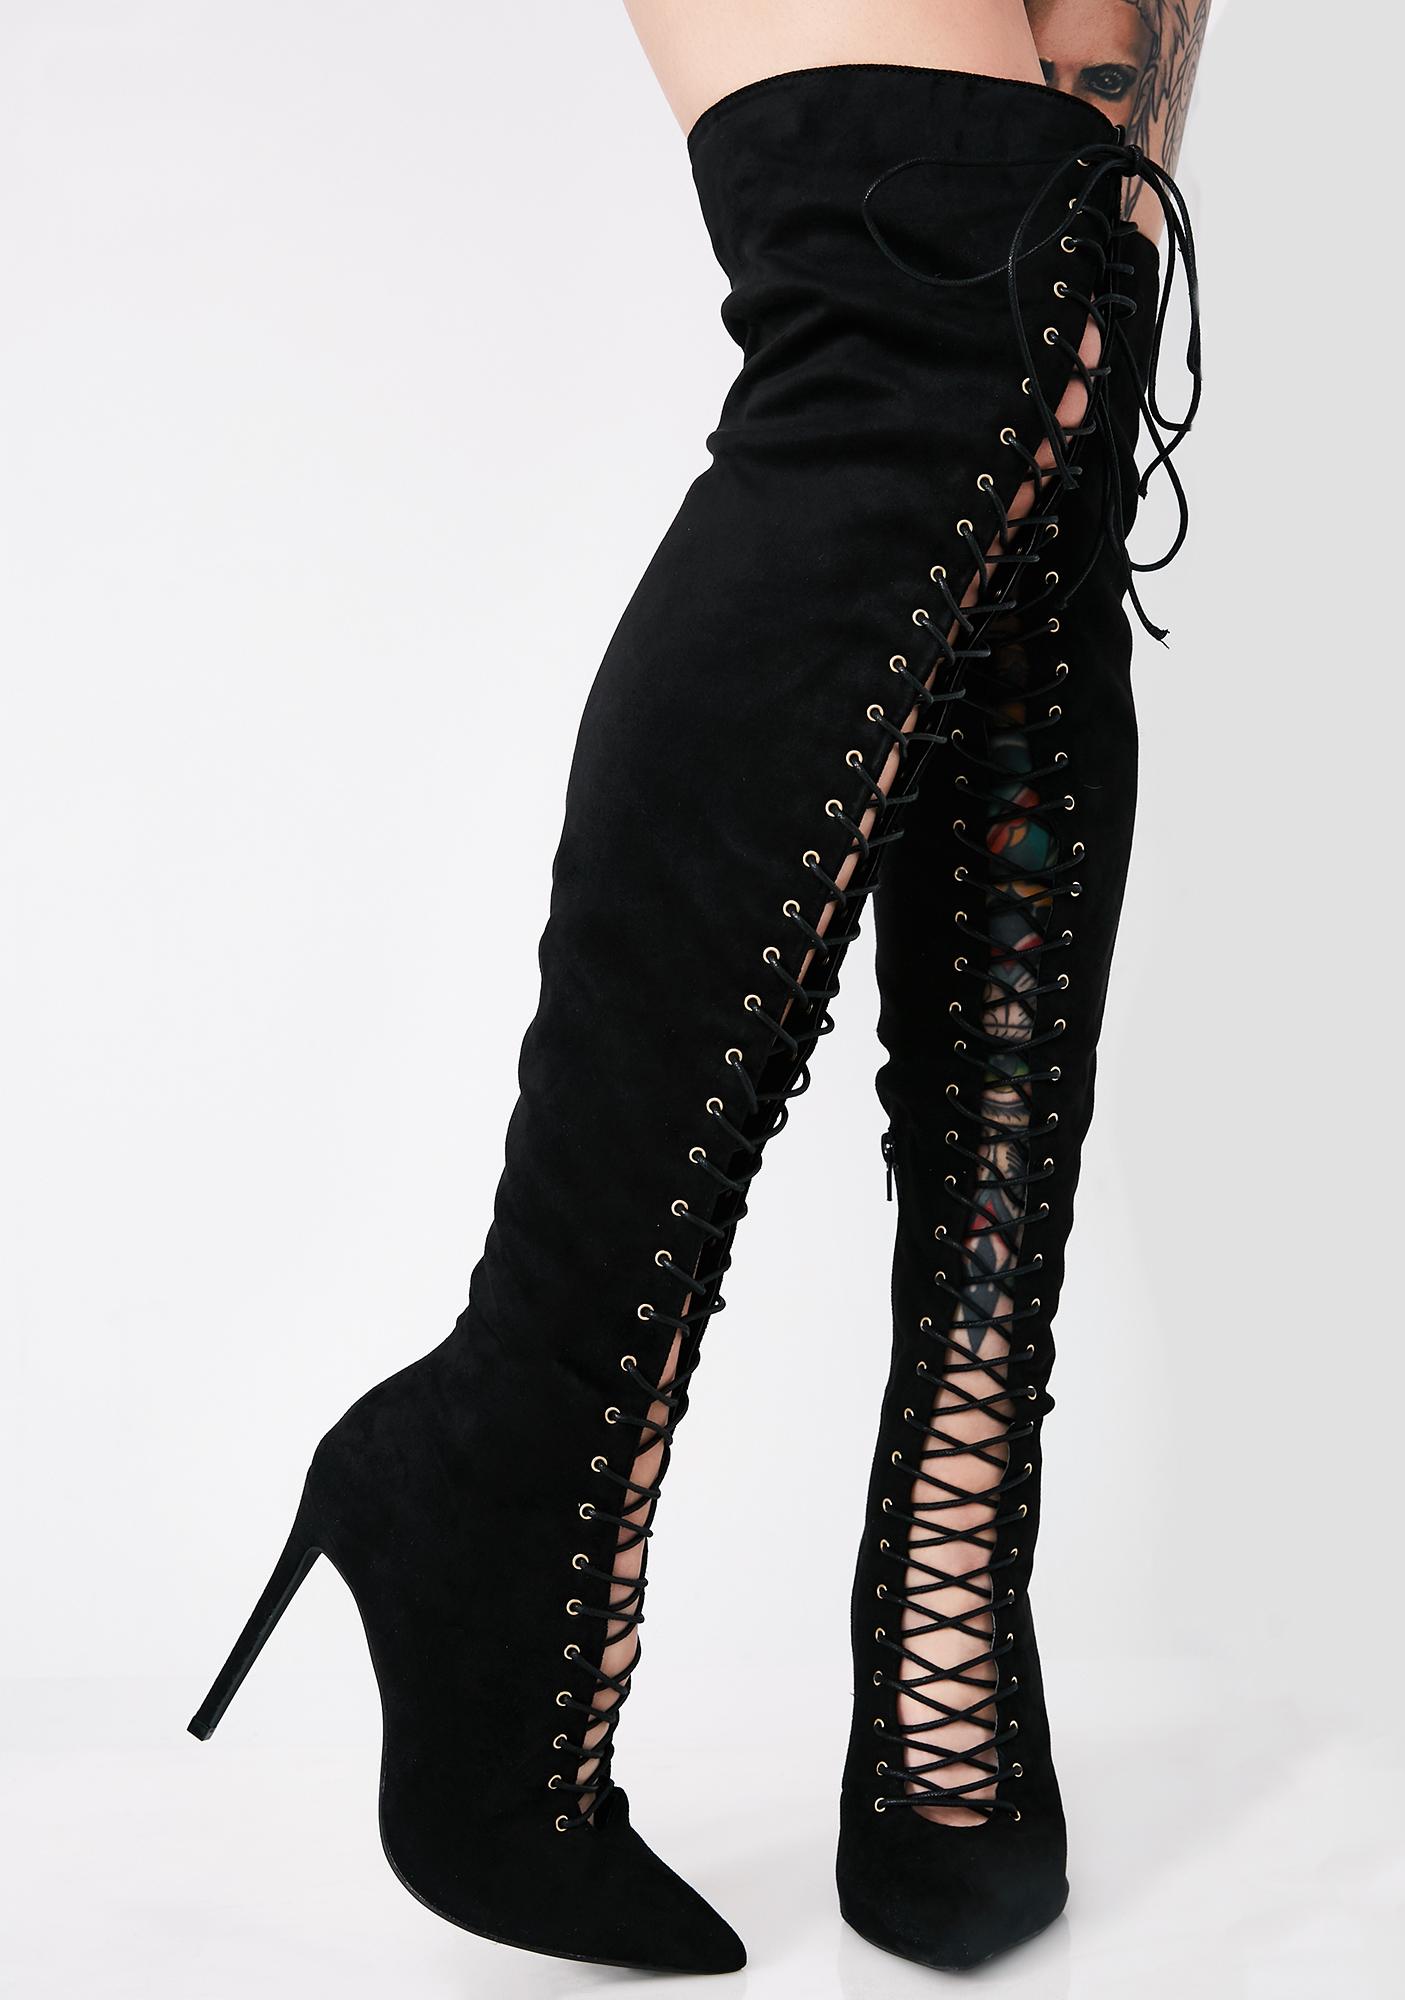 Thigh High Lace Up Black Boots | Dolls Kill